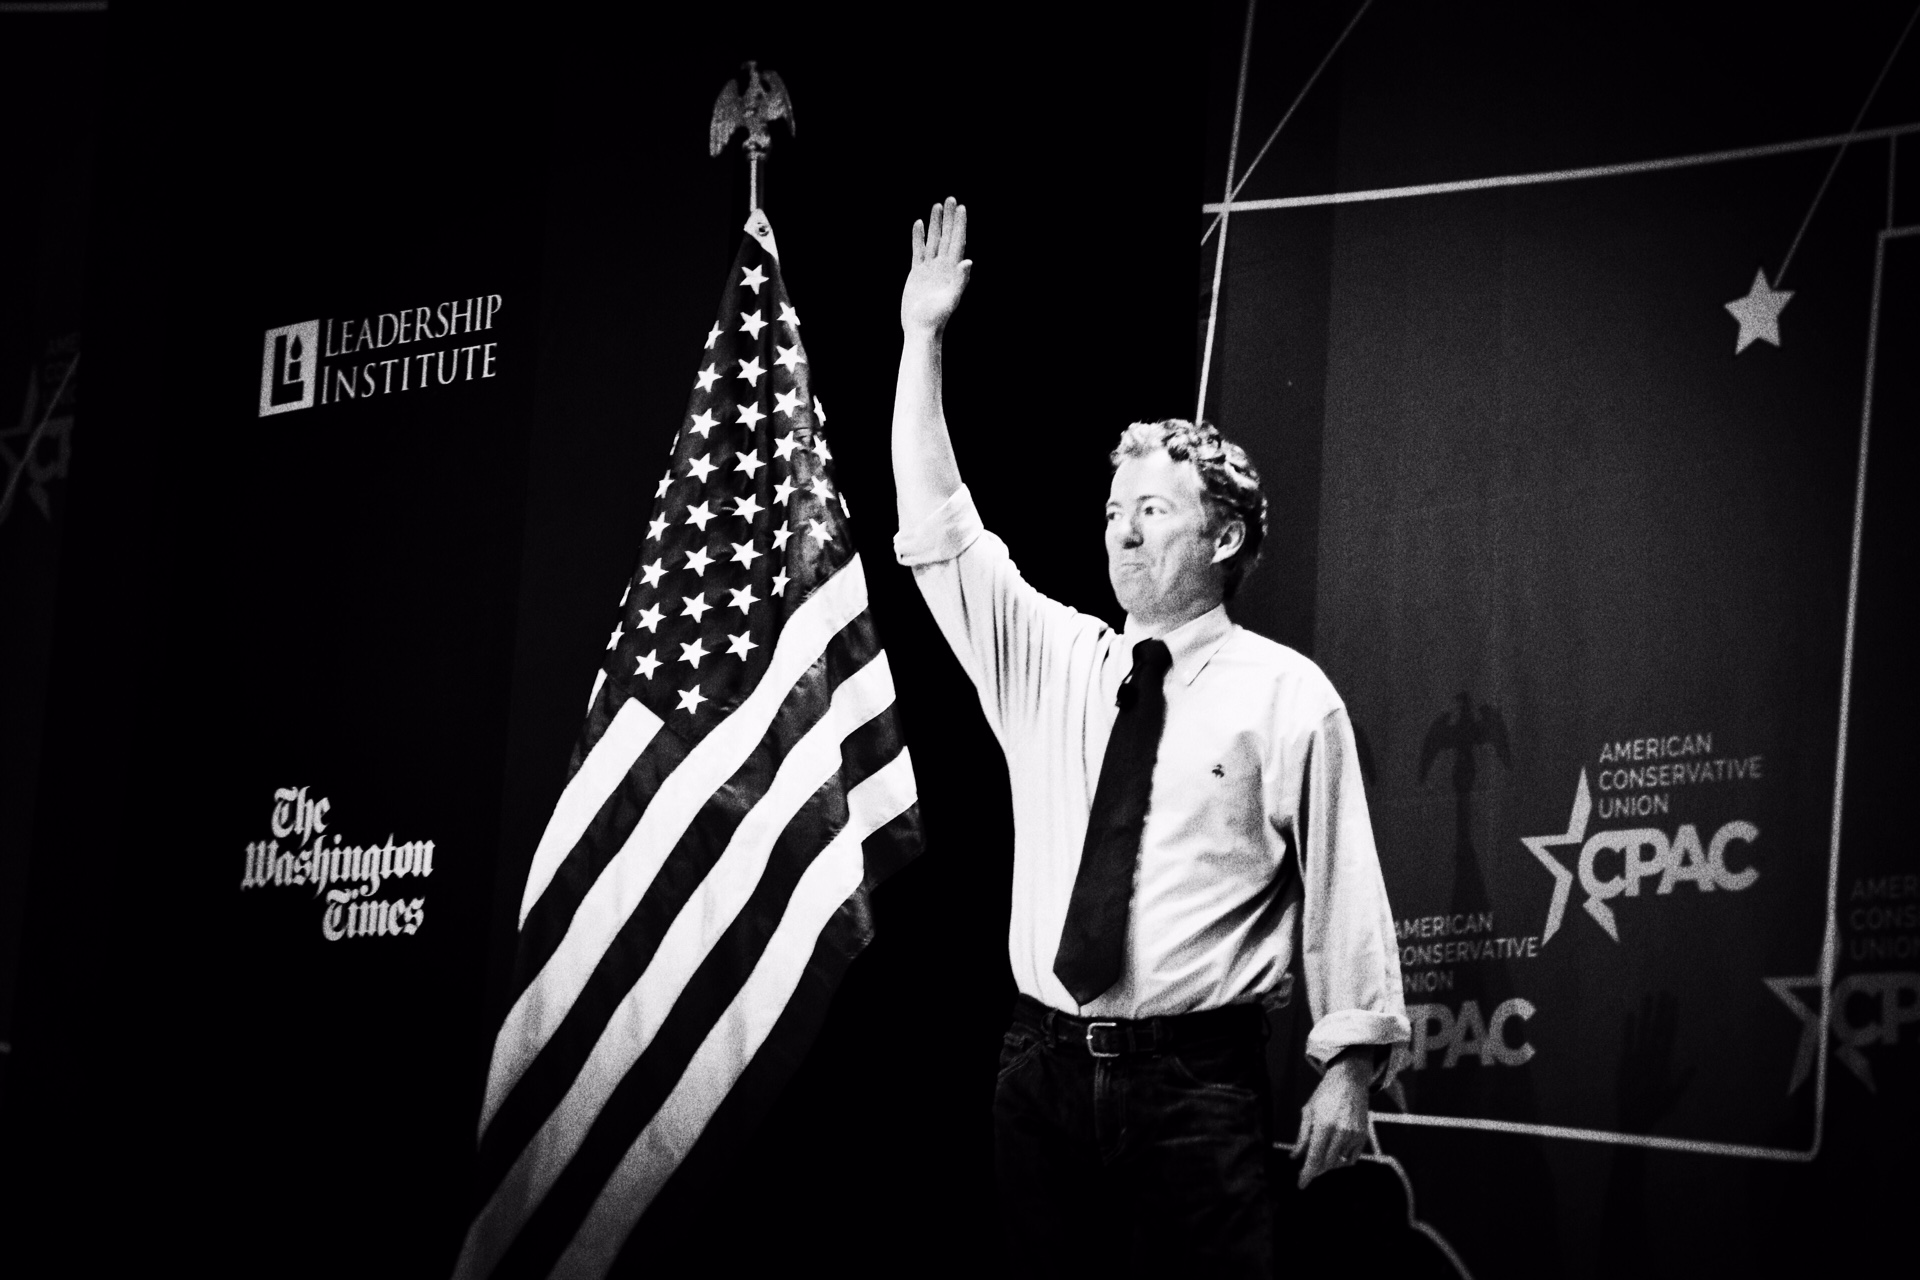 Rand Paul speaks at CPAC in National Harbor, Md. on Feb. 27, 2015. (Mark Peterson—Redux for TIME)